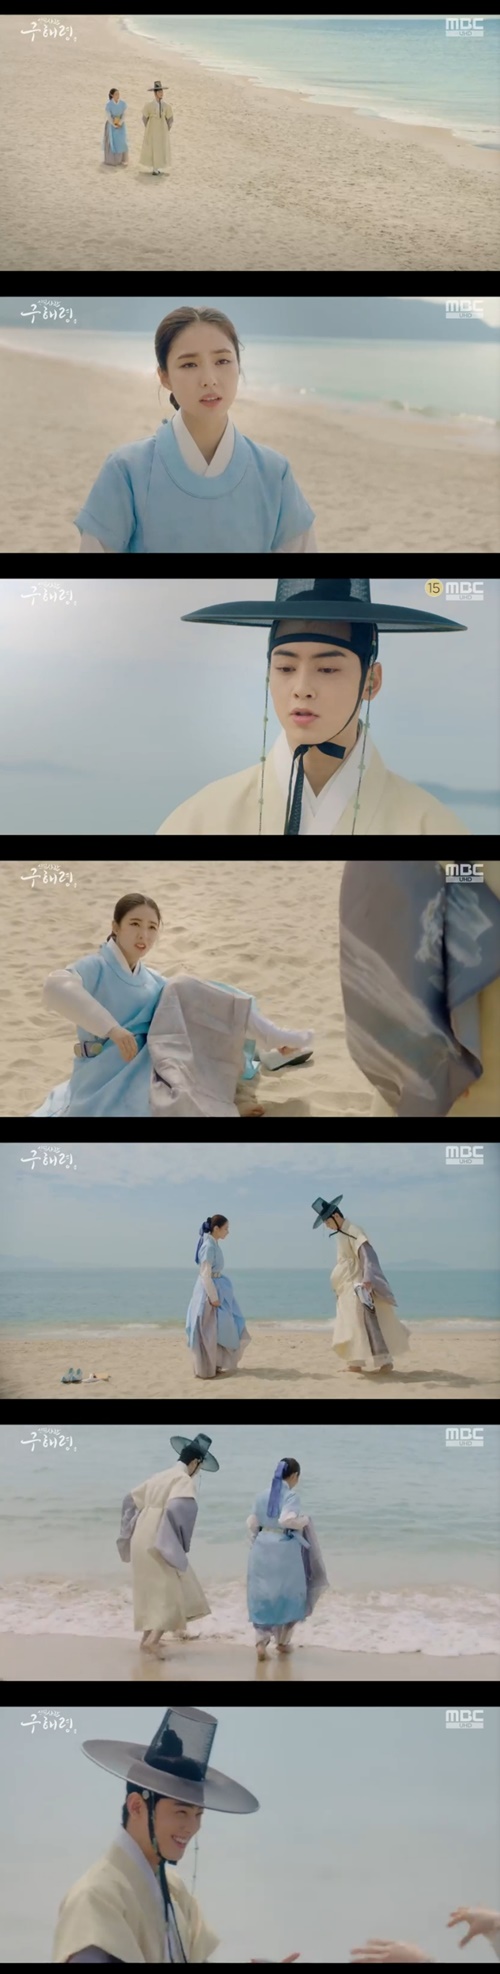 Na Hae-ryung, Jung Eun-woo and Shin Se-kyung went on a beach date.In the MBC drama Na Hae-ryung, which aired on the afternoon of the 7th, Lee Rim (Jung Eun-woo) and Na Hae-ryung (Shin Se-kyung) were shown dating on the beach.On this day, Irim walked along the beach with Na Hae-ryung.I was tired of walking on my feet while Mama, Mama, was making a comfortable speech, said Na Hae-ryung.Do it alone, he said firmly to him, walking without reason.Na Hae-ryung took off his gods and socks and said, Natt. You said it was your first time. Hands, toes. This feels like stepping on sand. Walk.How about that? he said, walking along the beach.Irim ran with Na Hae-ryung and went into the sea, saying, Its strange, its really strange.When asked where he wanted to go, Koo said, Where do I want to go? Too many. There are towers that have been tilted in Italy.Irim confessed that he wanted to go to Gazido (Dokdo).